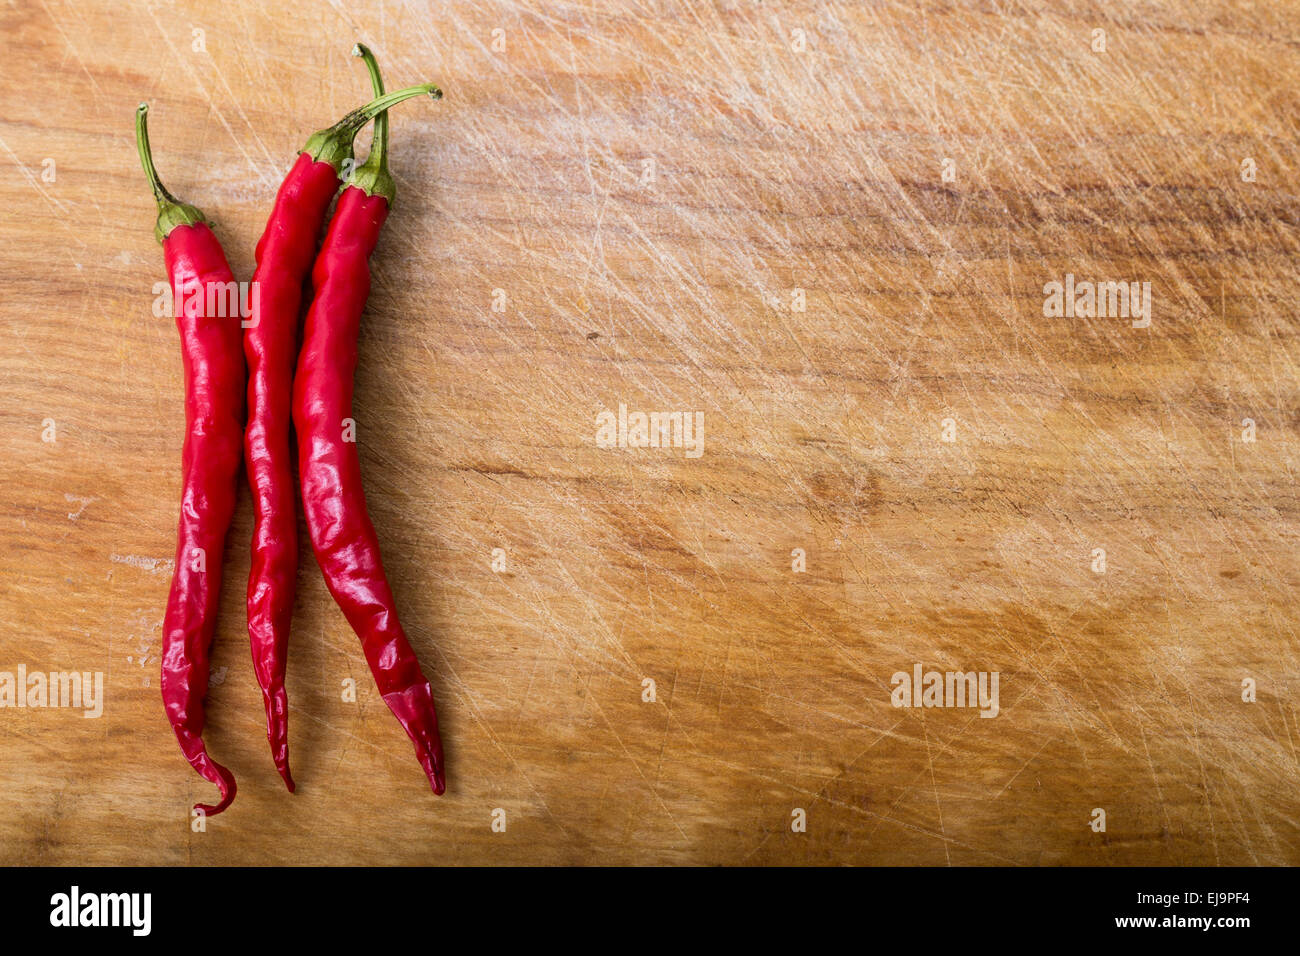 chili peppers on cutting board Stock Photo